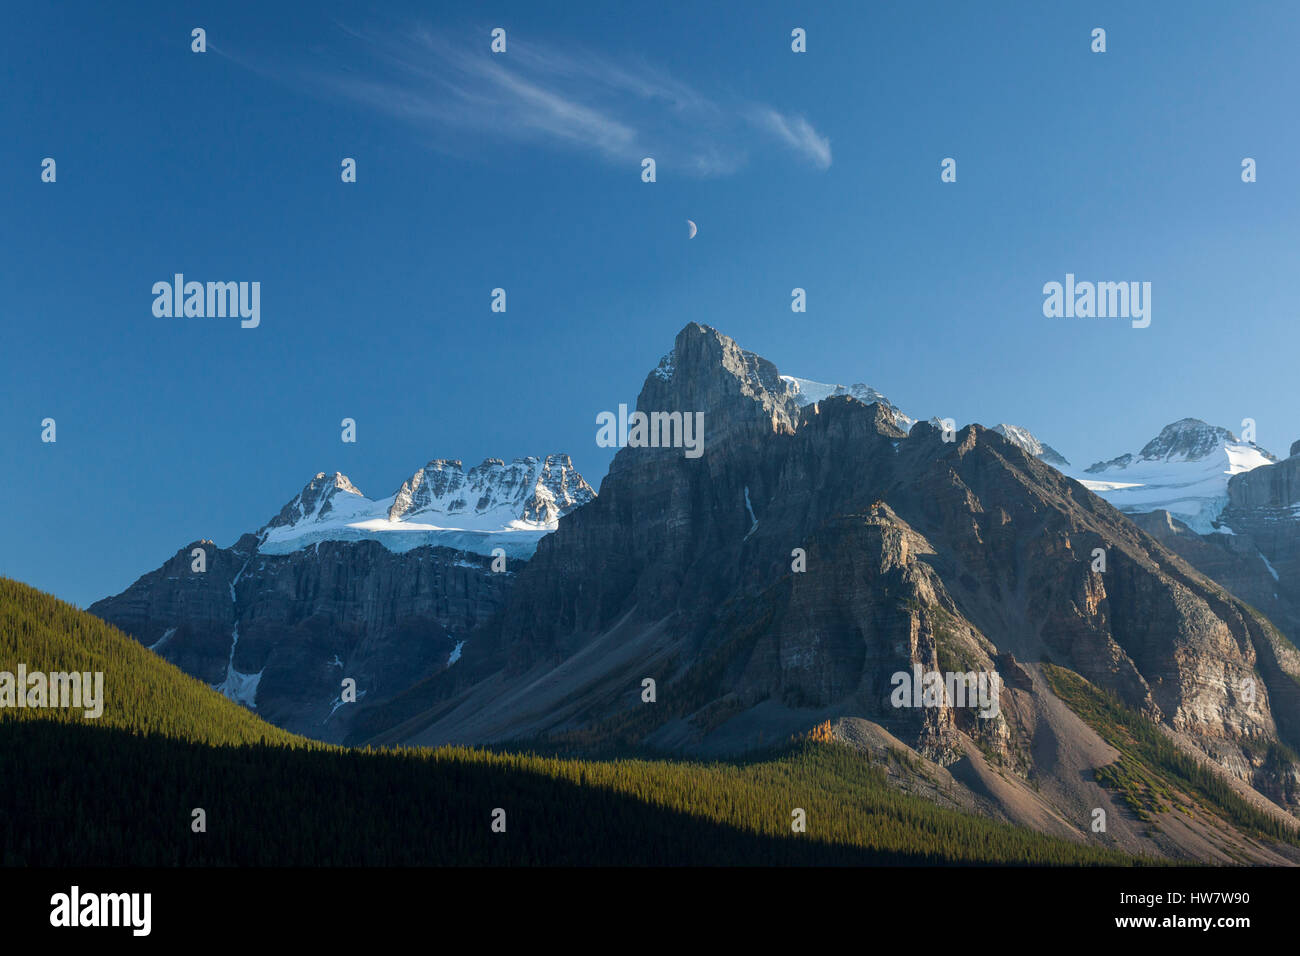 Moon over Mount Temple in Banff National Park, Canada. Stock Photo